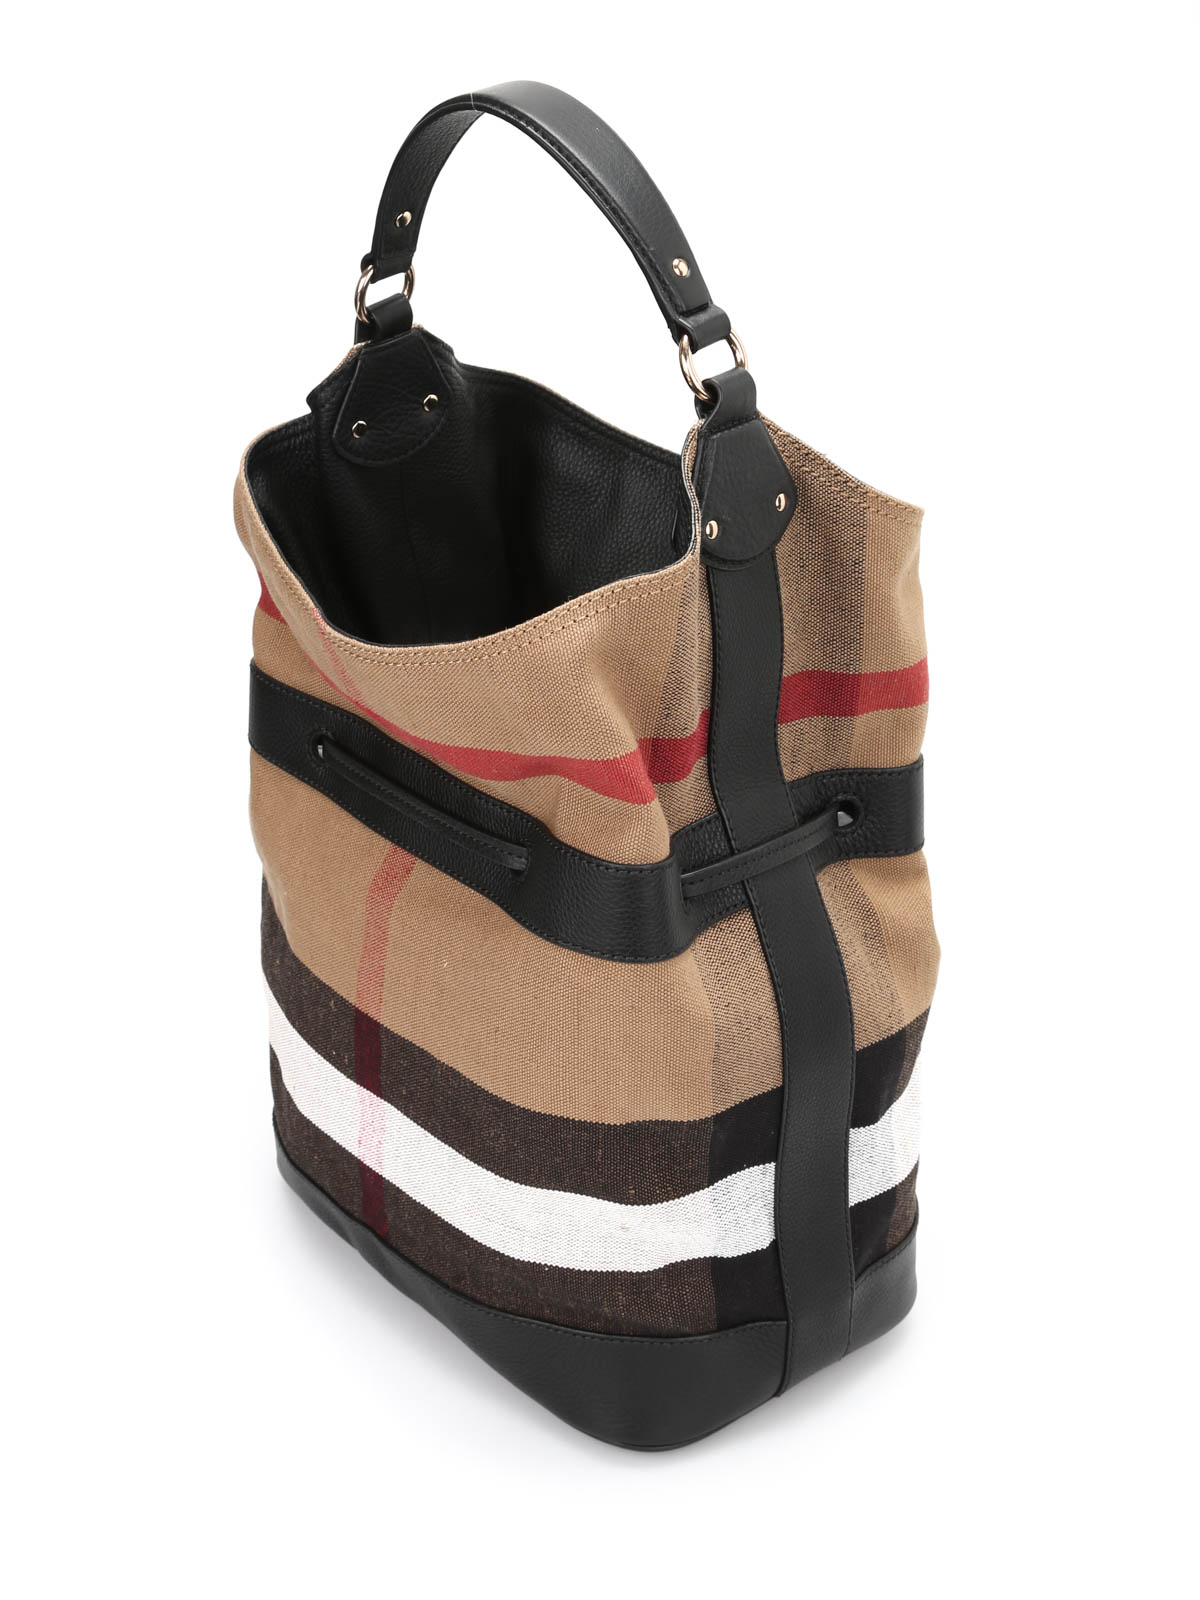 Burberry - Large Ashby canvas bag - Bucket bags - 39978501